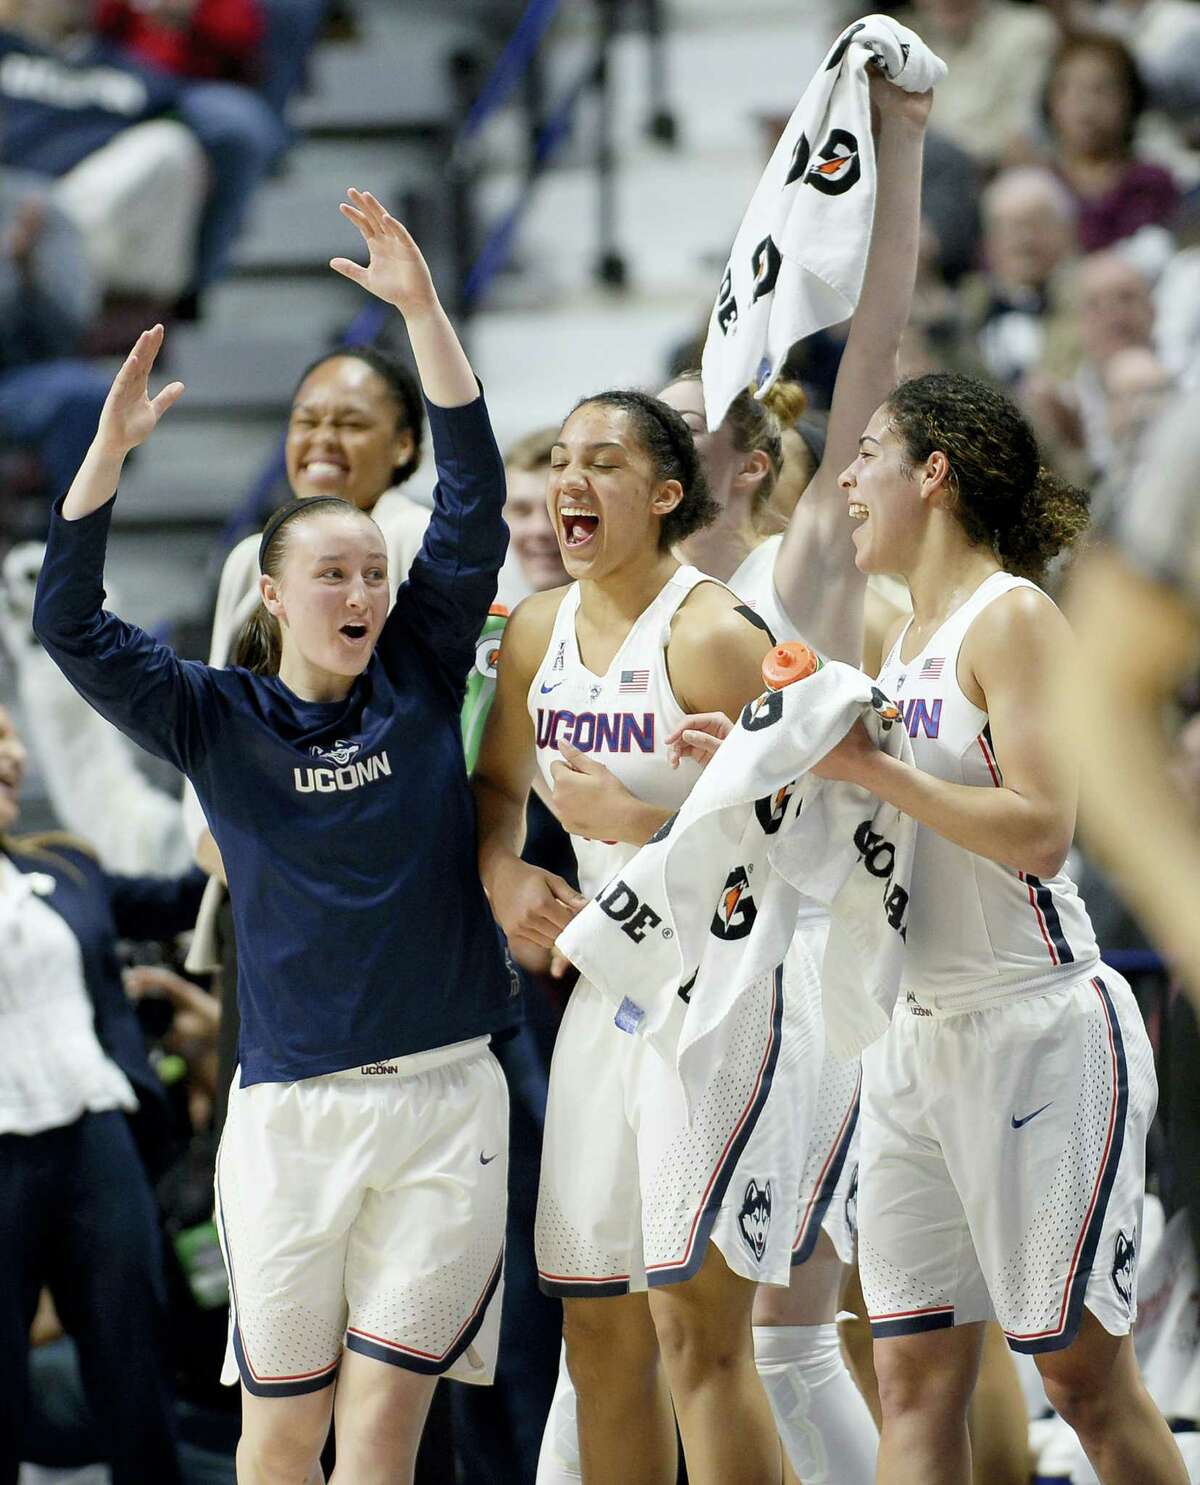 Connecticut’s Tierney Lawlor, left, celebrates with Gabby Williams, center, and Kia Nurse, right, during the second half of an NCAA college basketball game against South Florida in the American Athletic Conference tournament finals at Mohegan Sun Arena on March 6, 2017 in Uncasville, Conn.